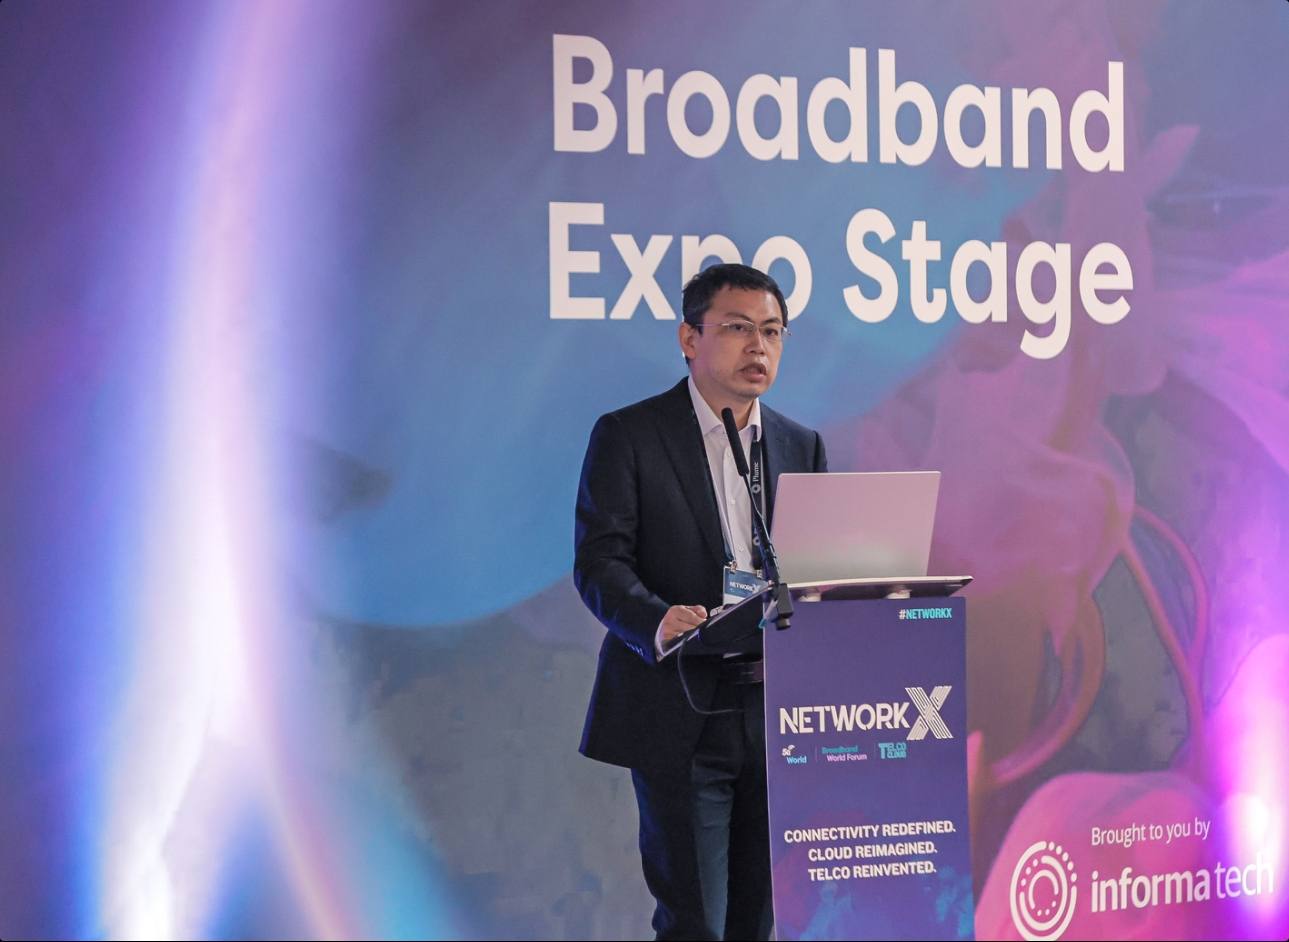 ZTE shares insights into challenges and strategies for multi-service access at Broadband Forum workshop